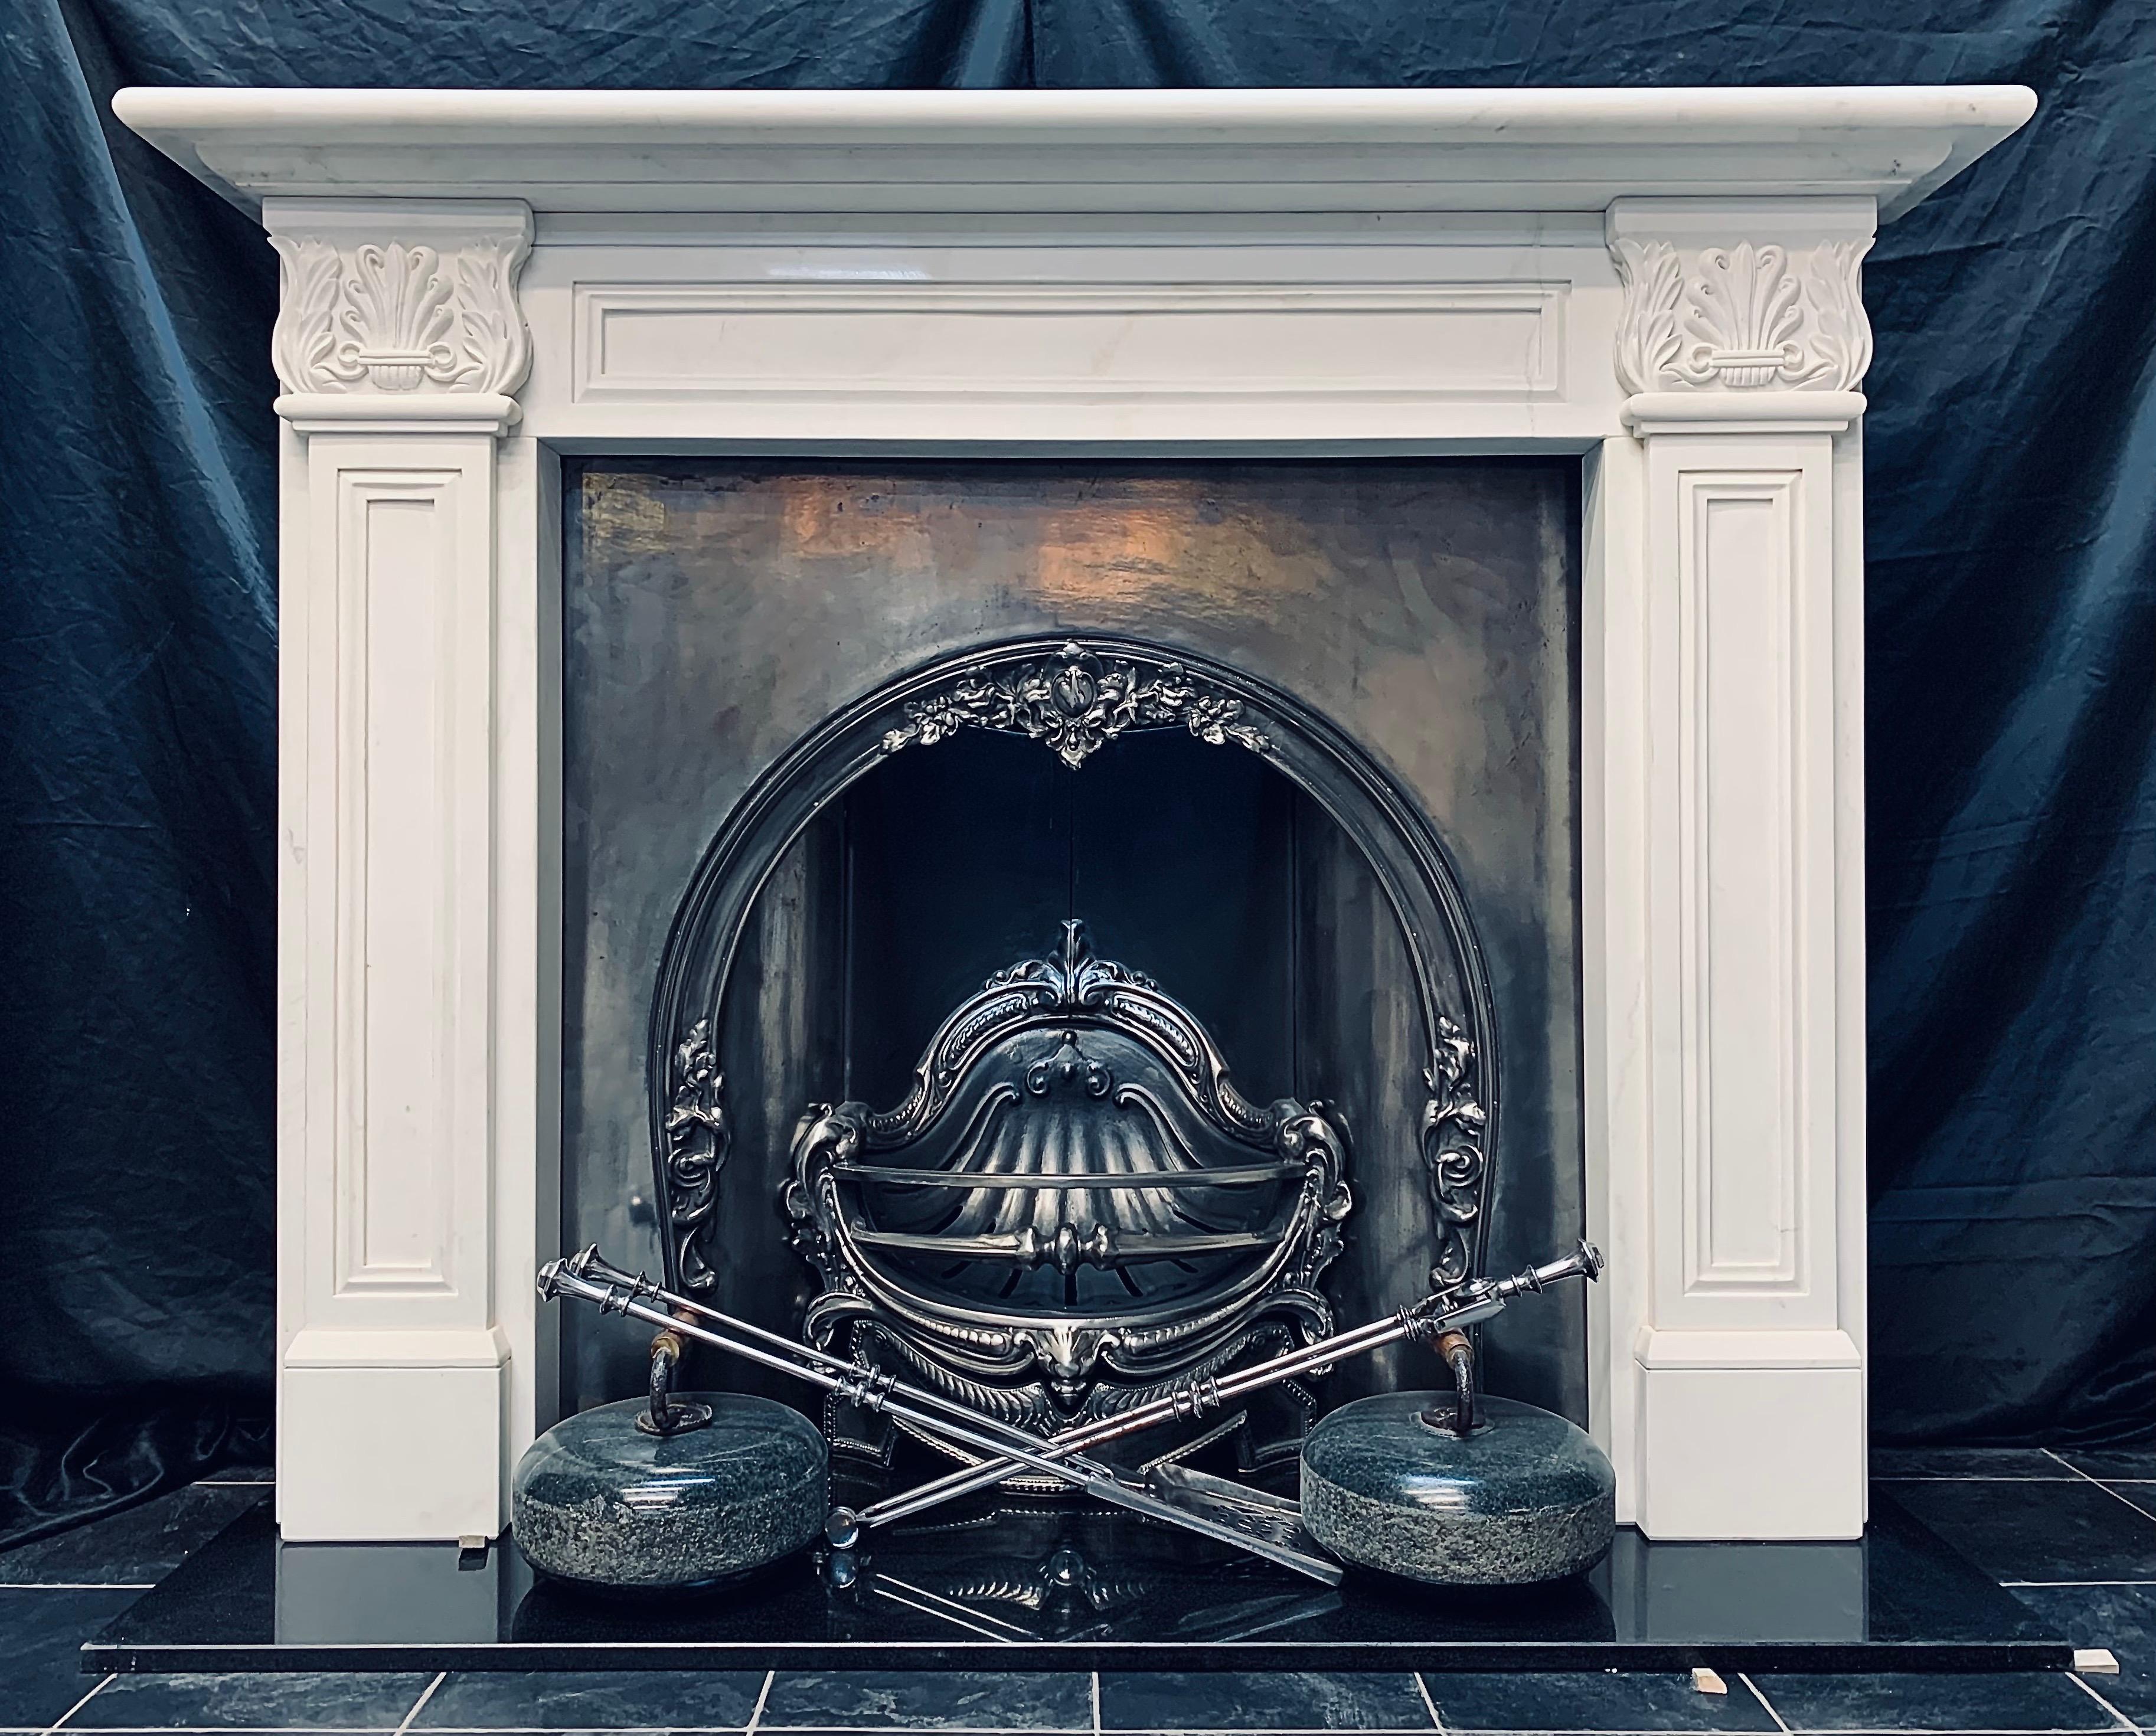 A carved white marble fireplace mantel complete with a cast iron horseshoe fireplace insert with an internal scallop fire grate, in the English Regency Greek Revival manner with recessed panels and carved high relief anthymion end blocks.

Fire